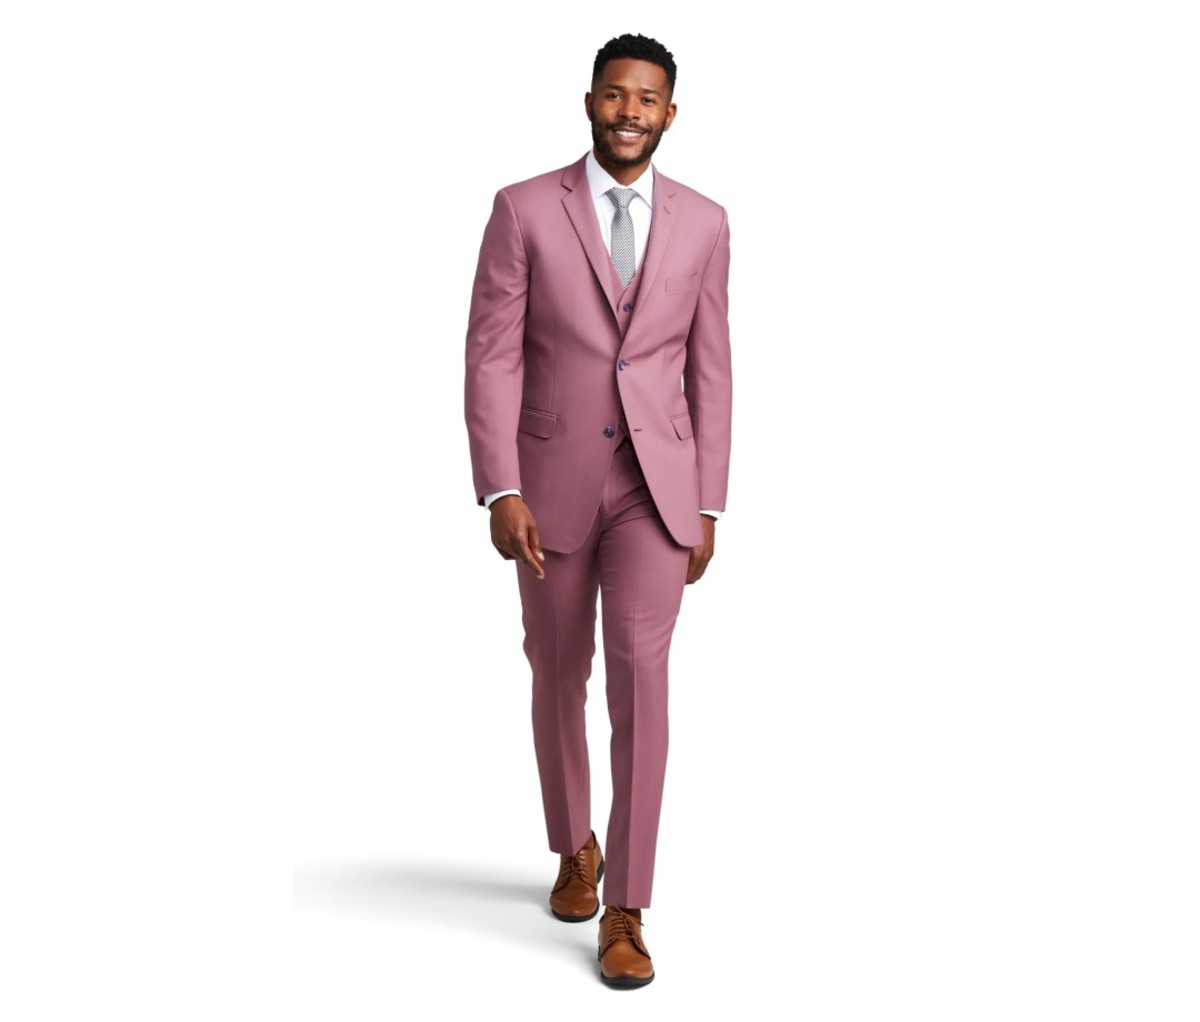 Man wearing suit from Stitch & Tie